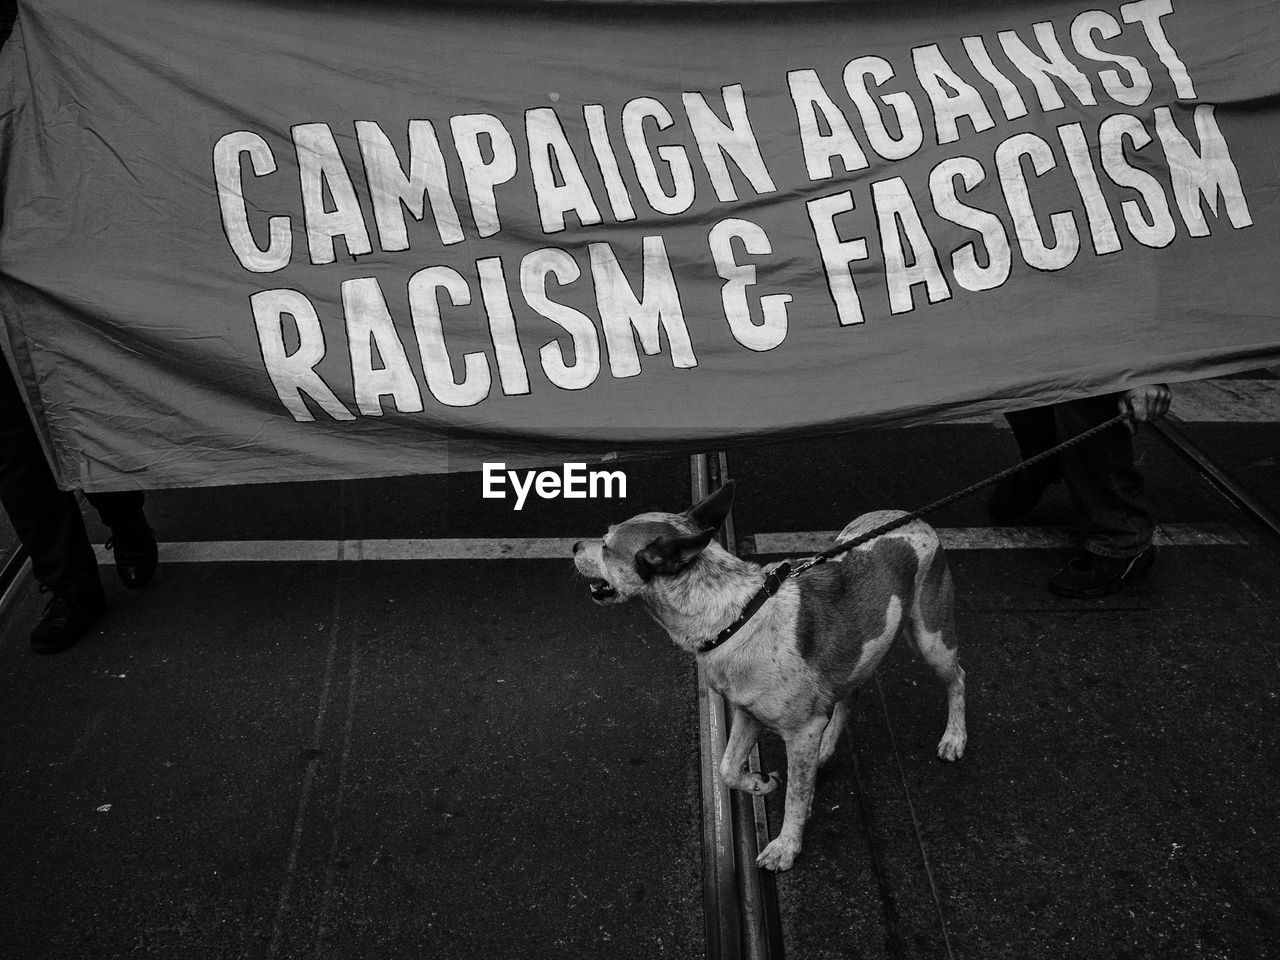 Dog on street against banner during political rally